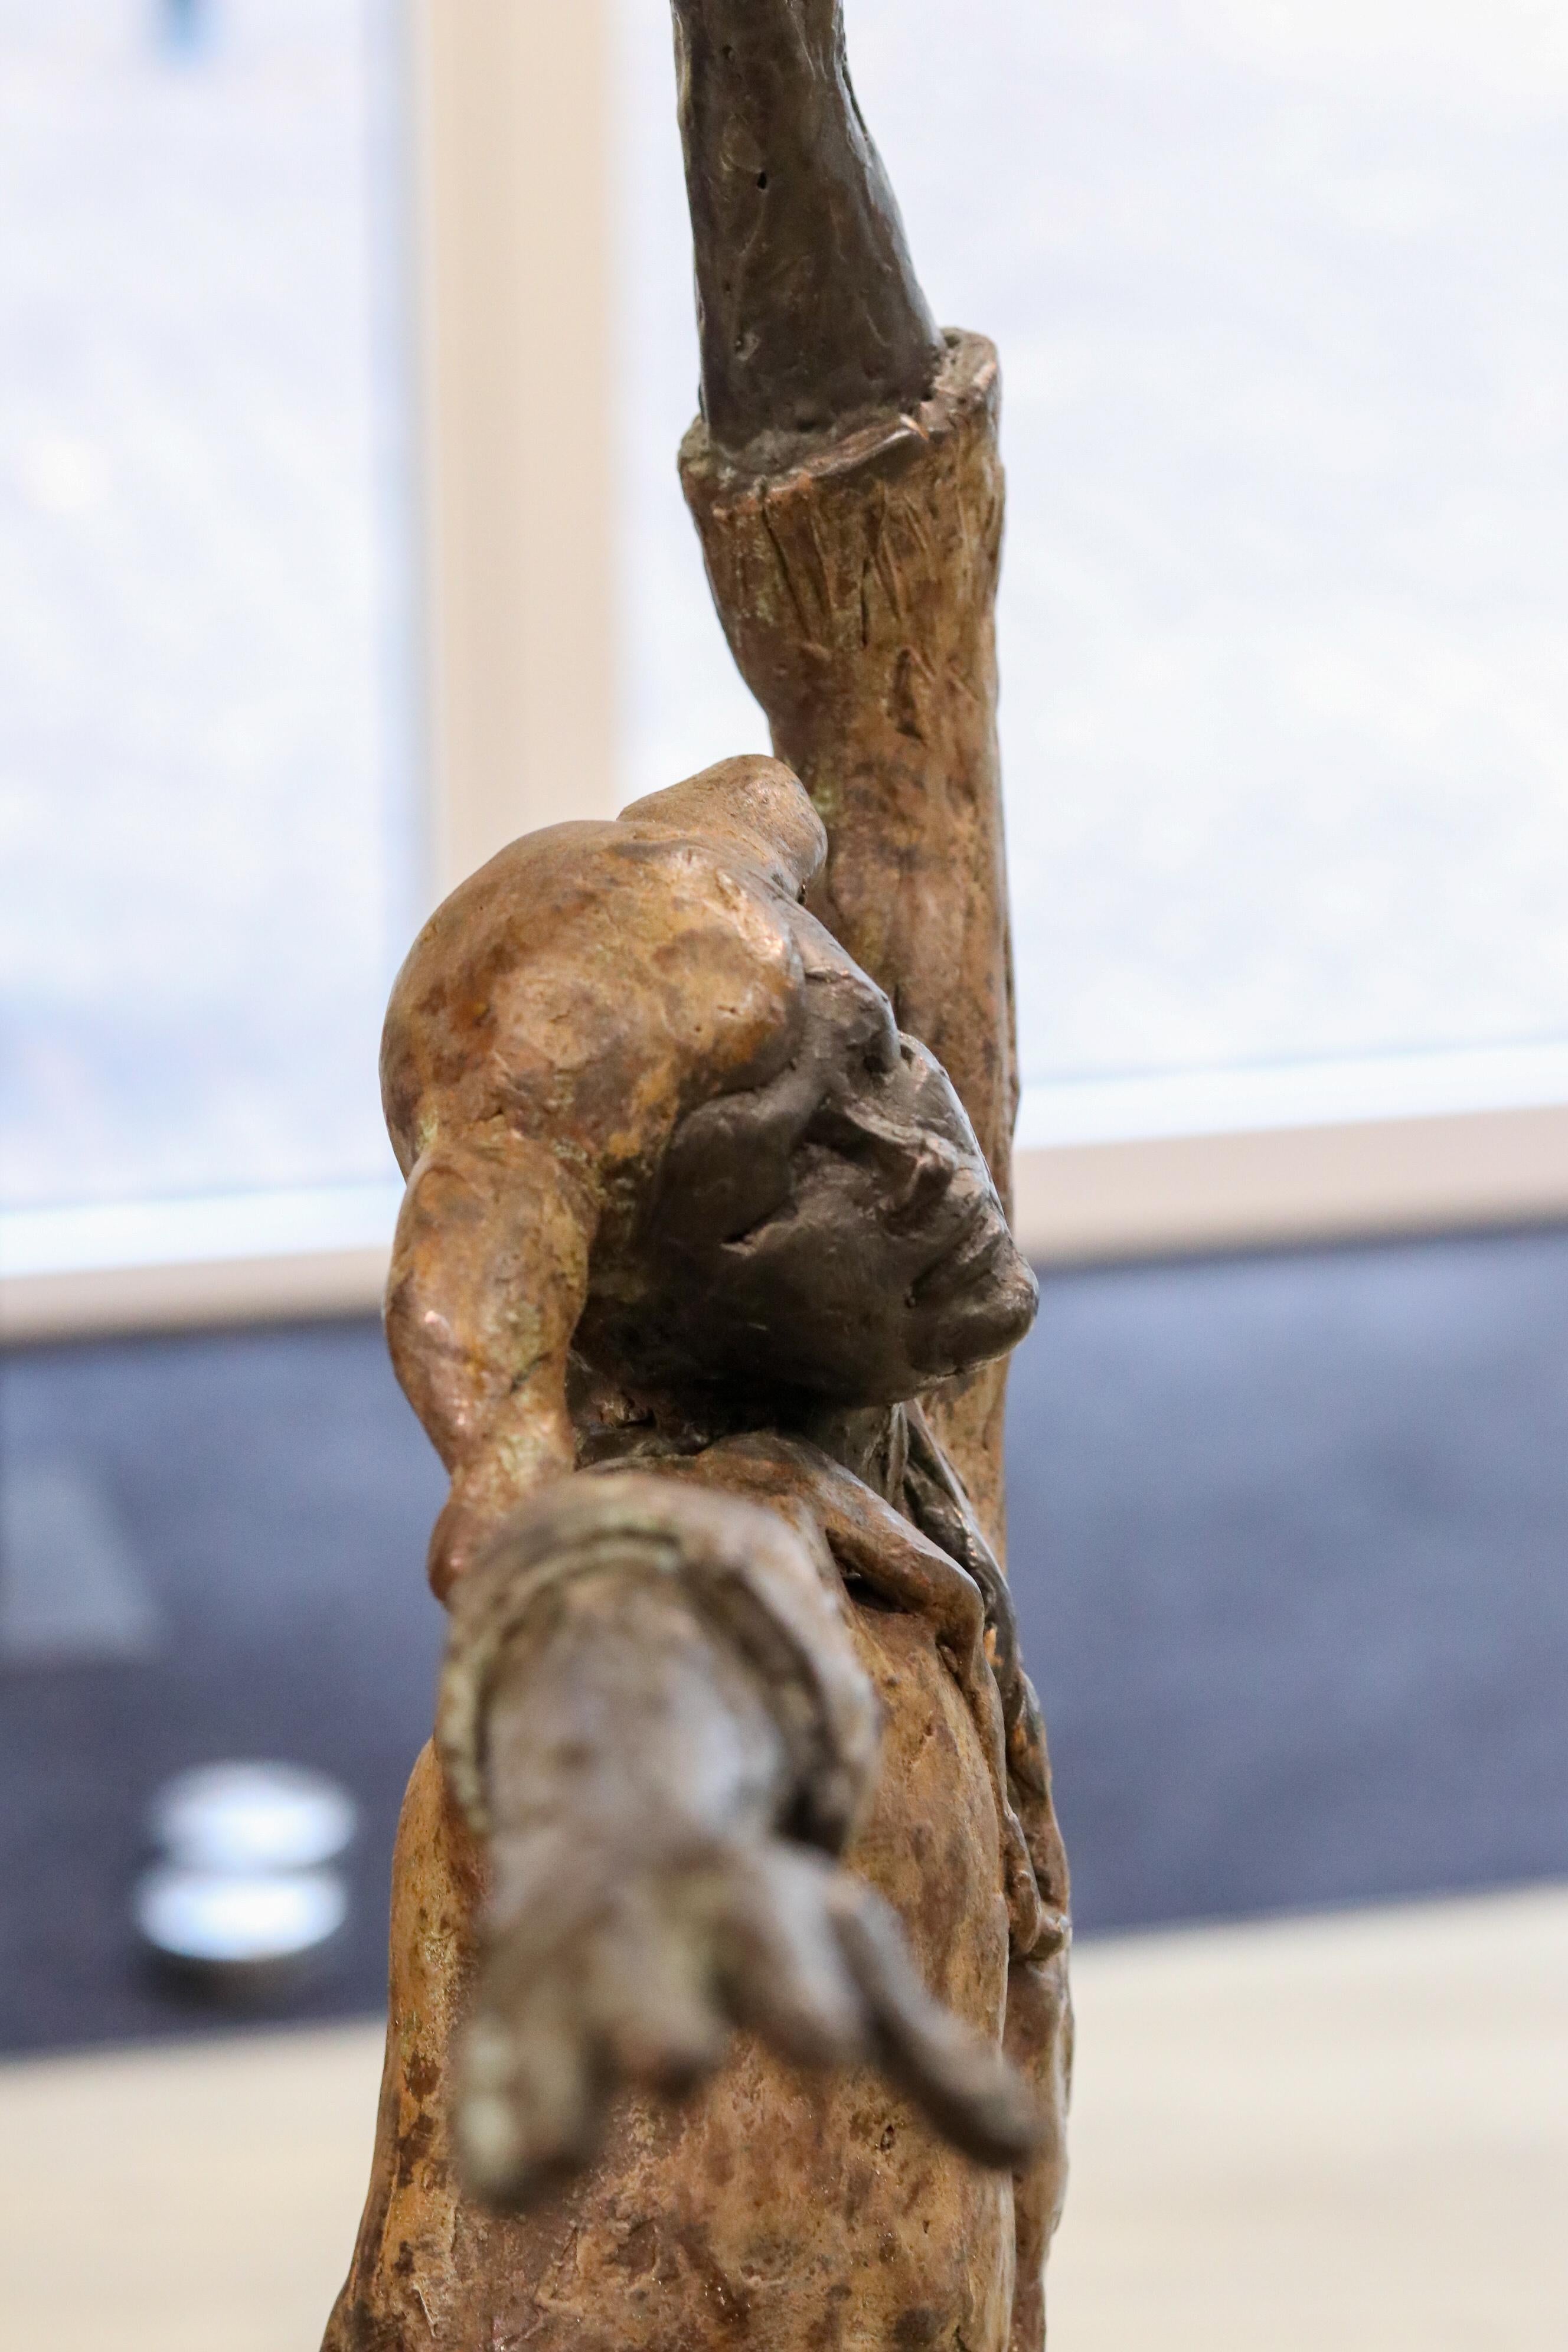 This sculpture is made by Dutch artist Romee Kanis.

You can rightly call Romee Kanis an old acquaintance of the gallery, her work was regularly seen at the gallery until a few years ago. We restore this tradition in honor. We met Romee for the